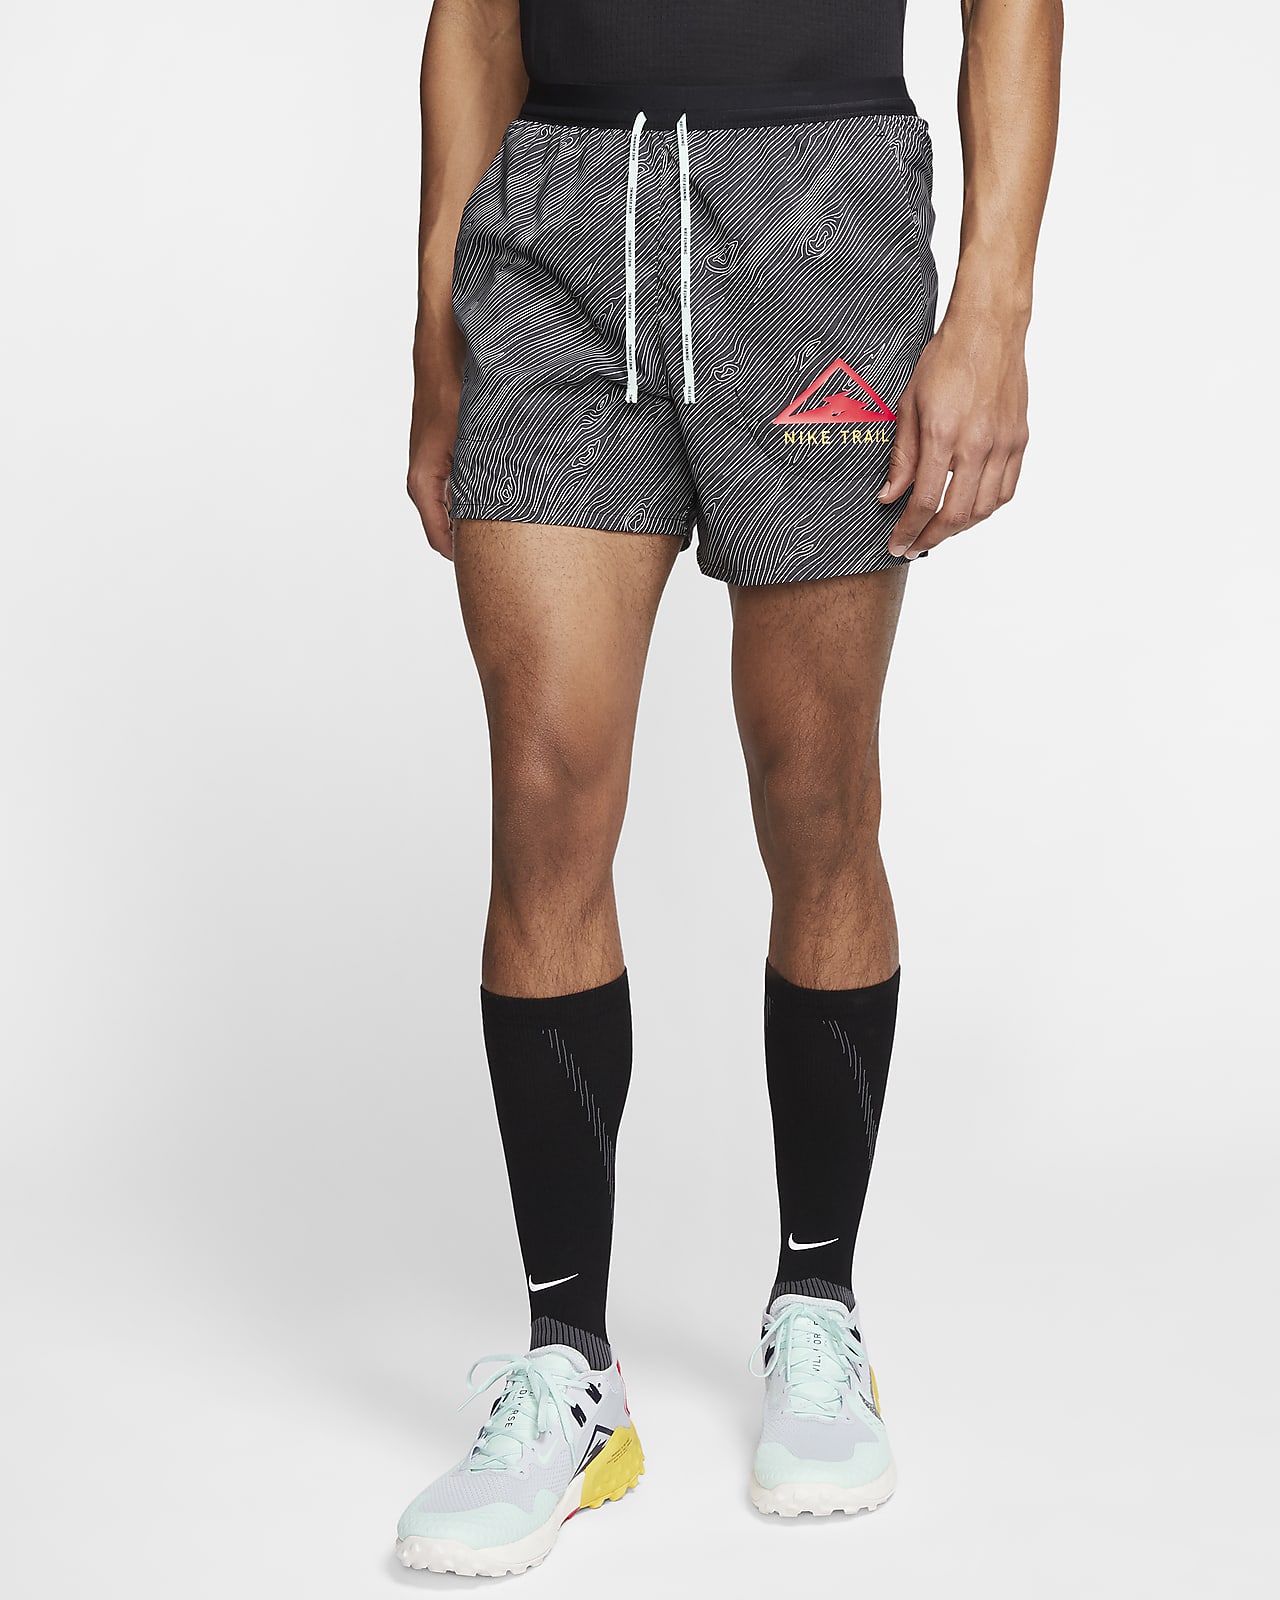 nike shorts without liner